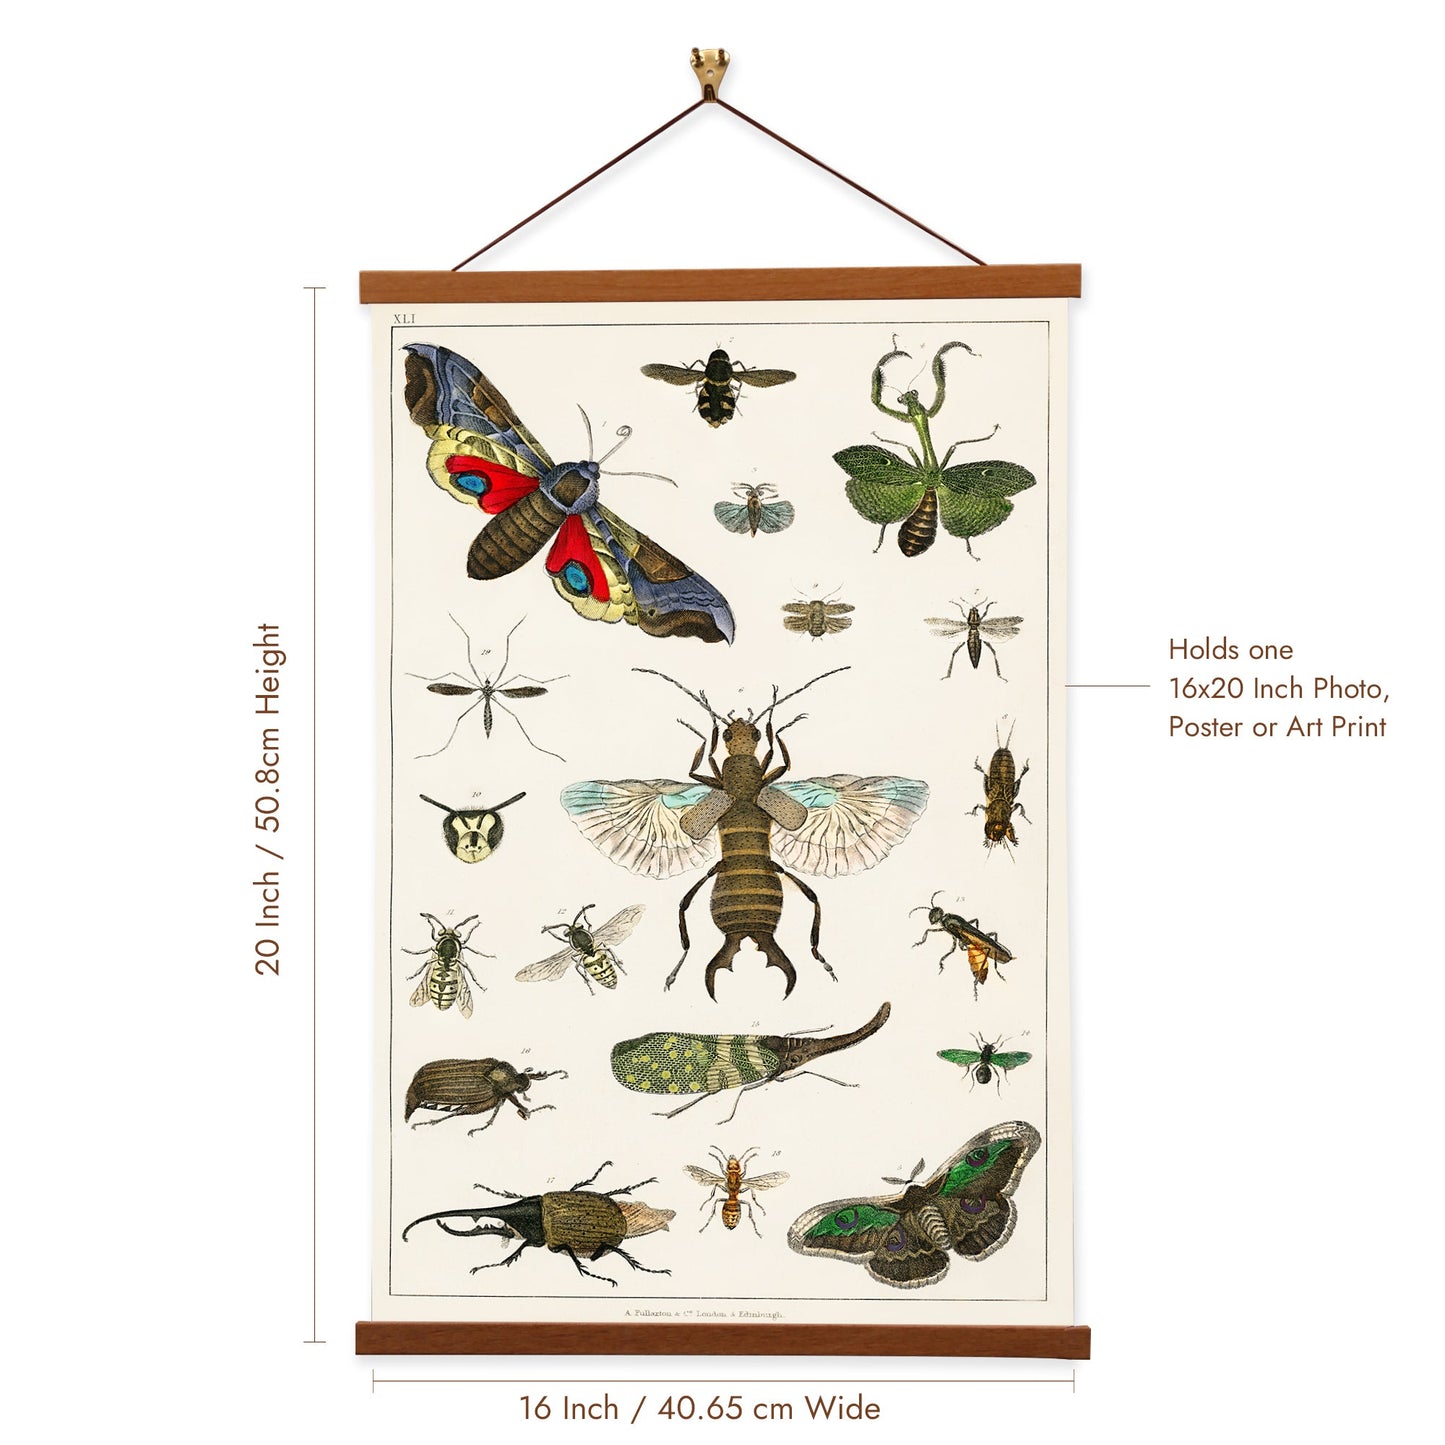 Collection of various insects (No. 41) by Oliver Goldsmith